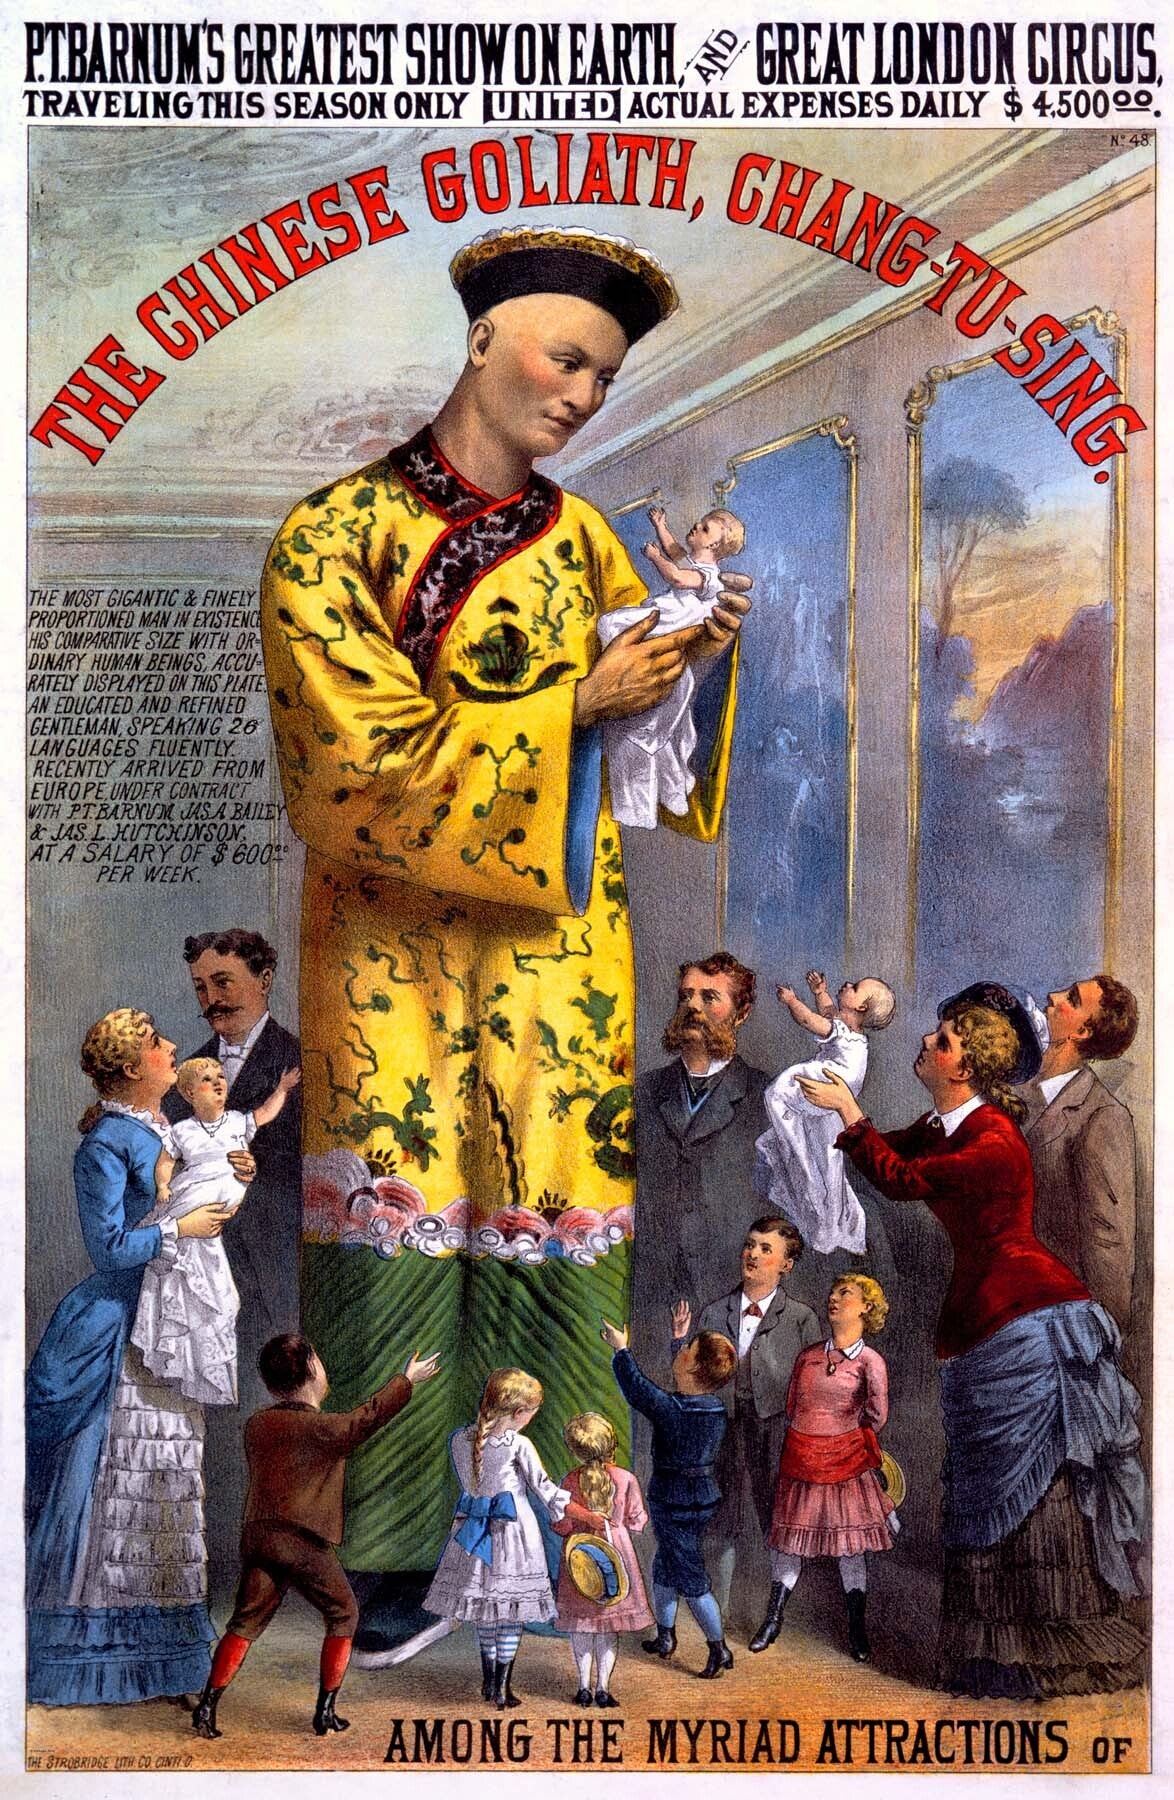 P.T. Barnum and the Great London Circus: The Chinese Goliath 0000-0618